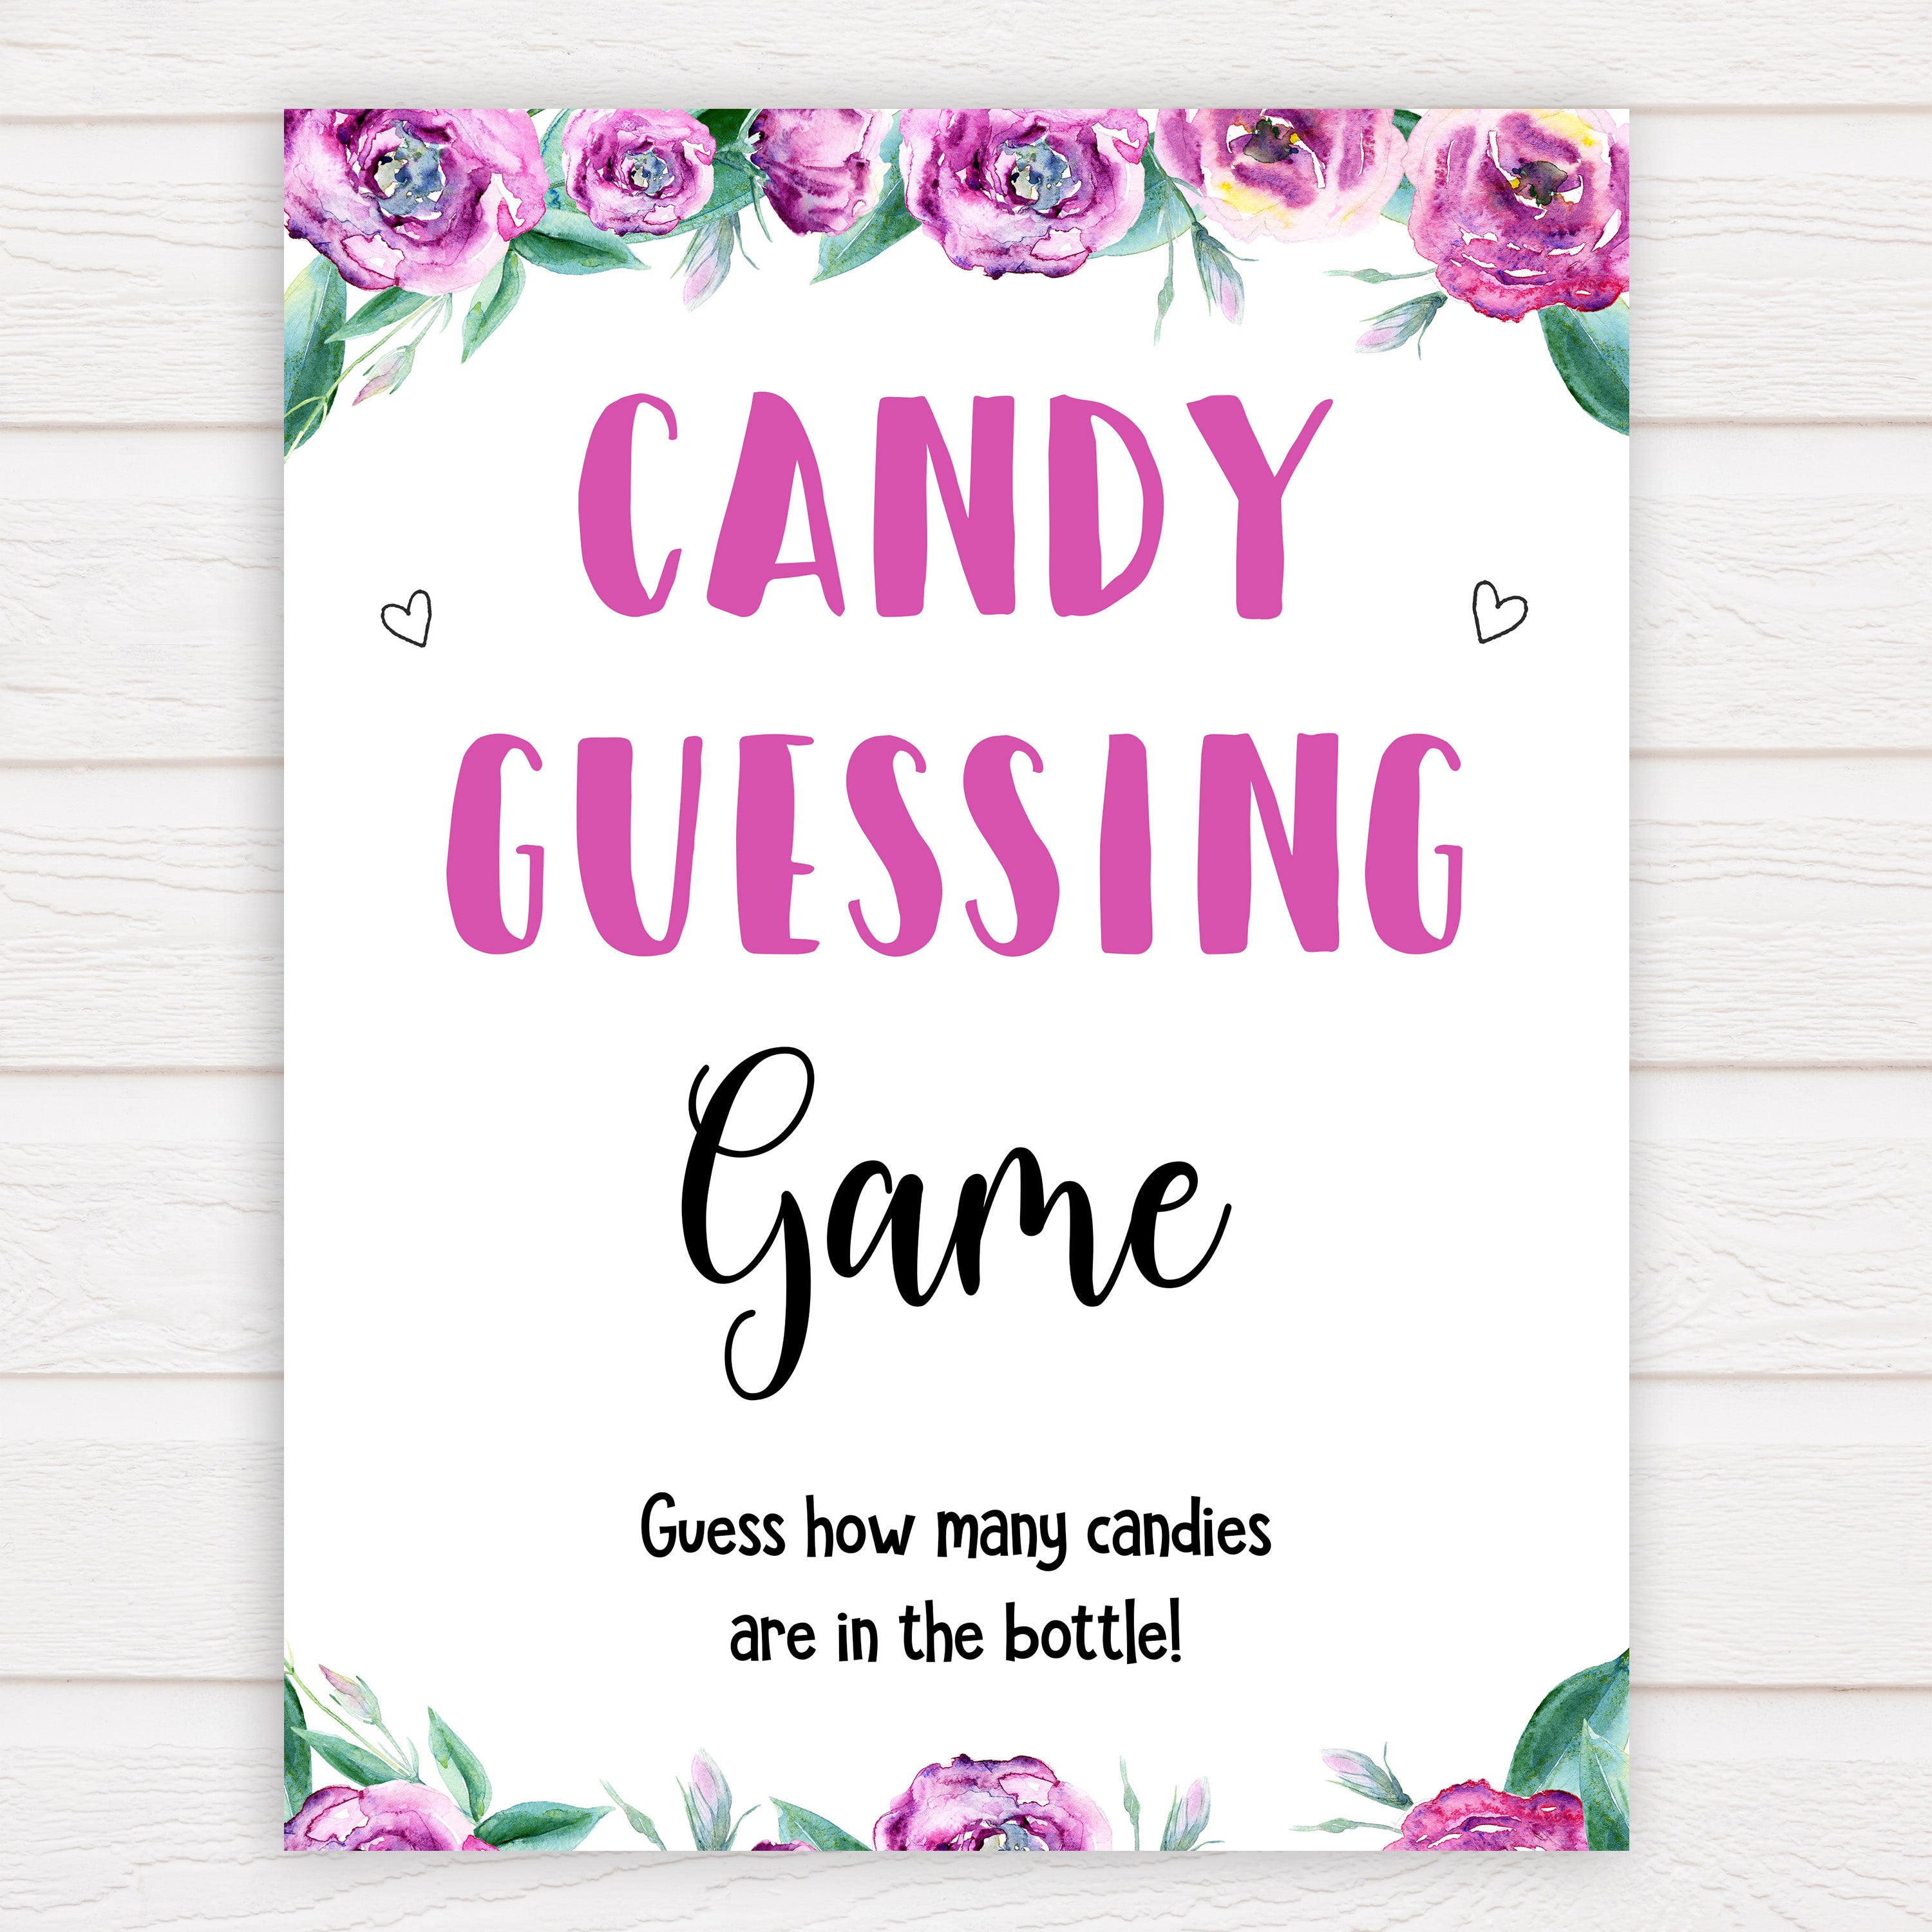 Purple peonies candy guessing game baby shower games, printable baby shower games, fun baby shower games, baby shower games, popular baby shower games, floral baby shower games, purple baby shower themes